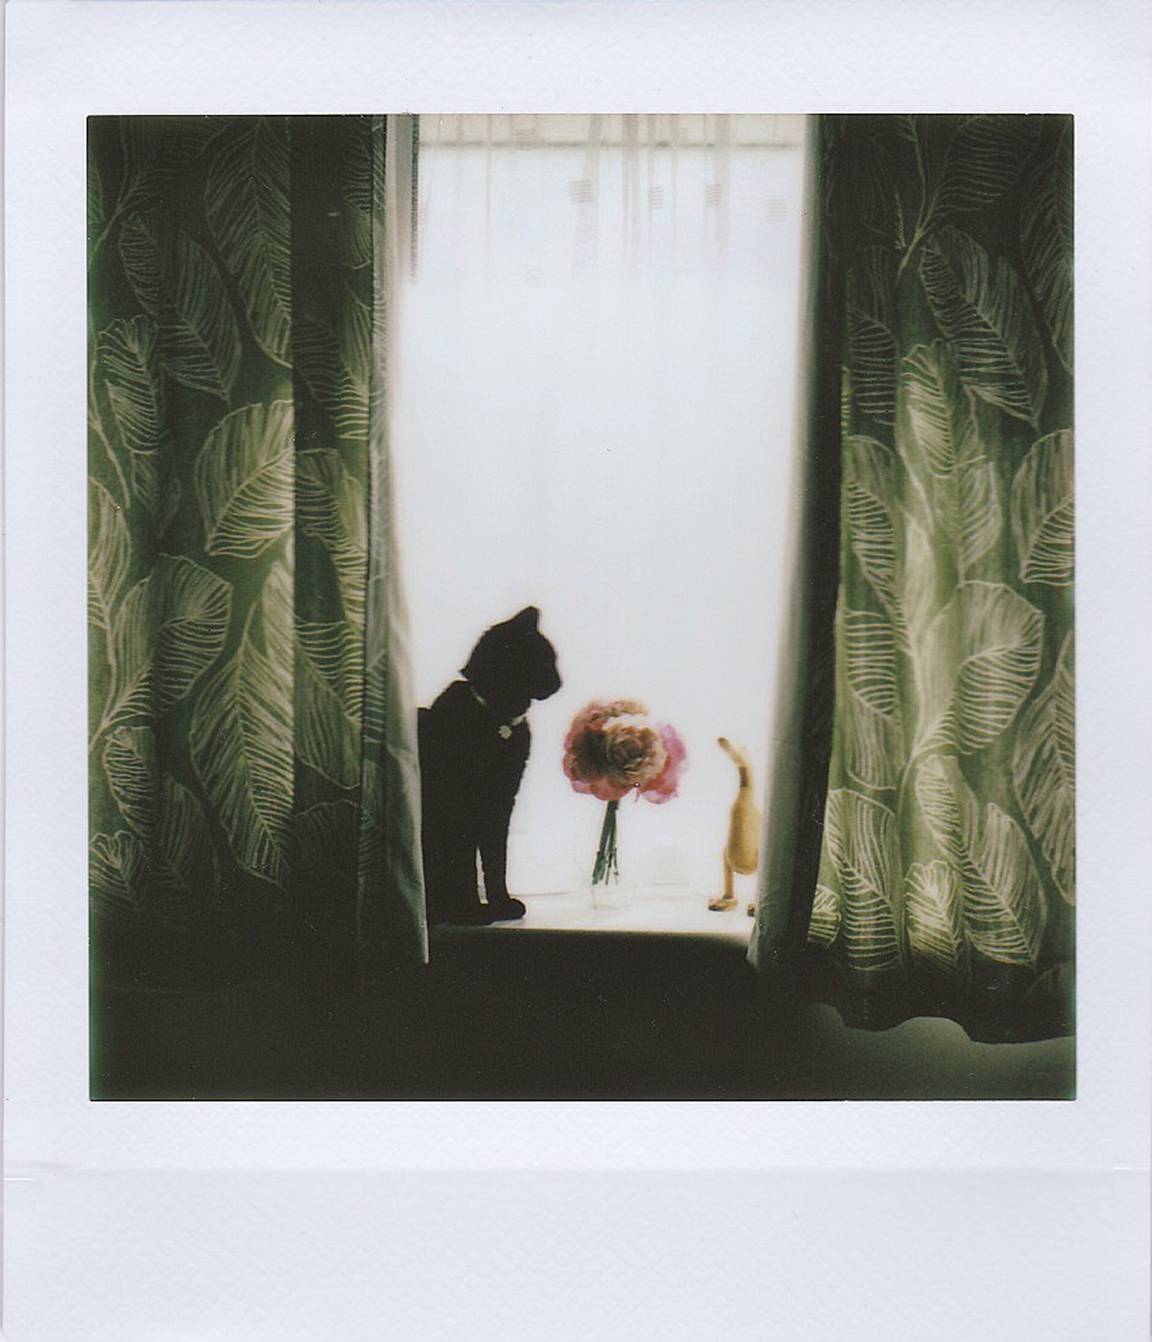 Lisafot is our LomoHome of the Day!